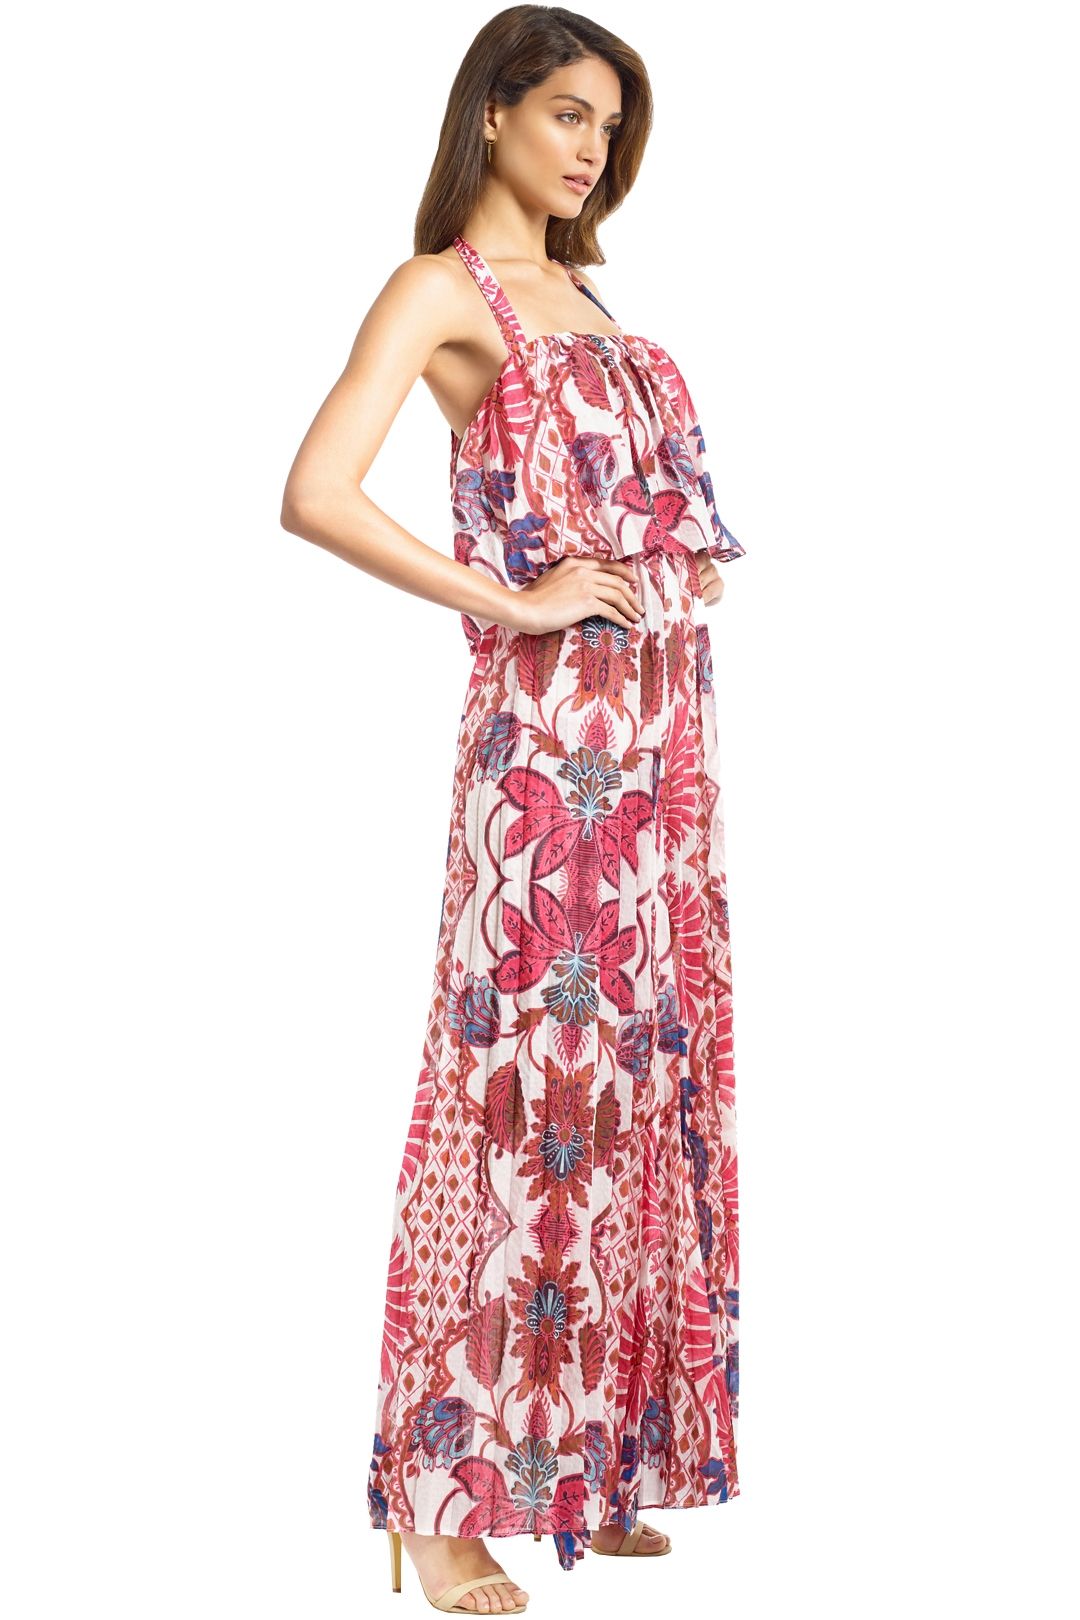 The Jetset Diaries - Lana Floral Jumpsuit - Pink - Side